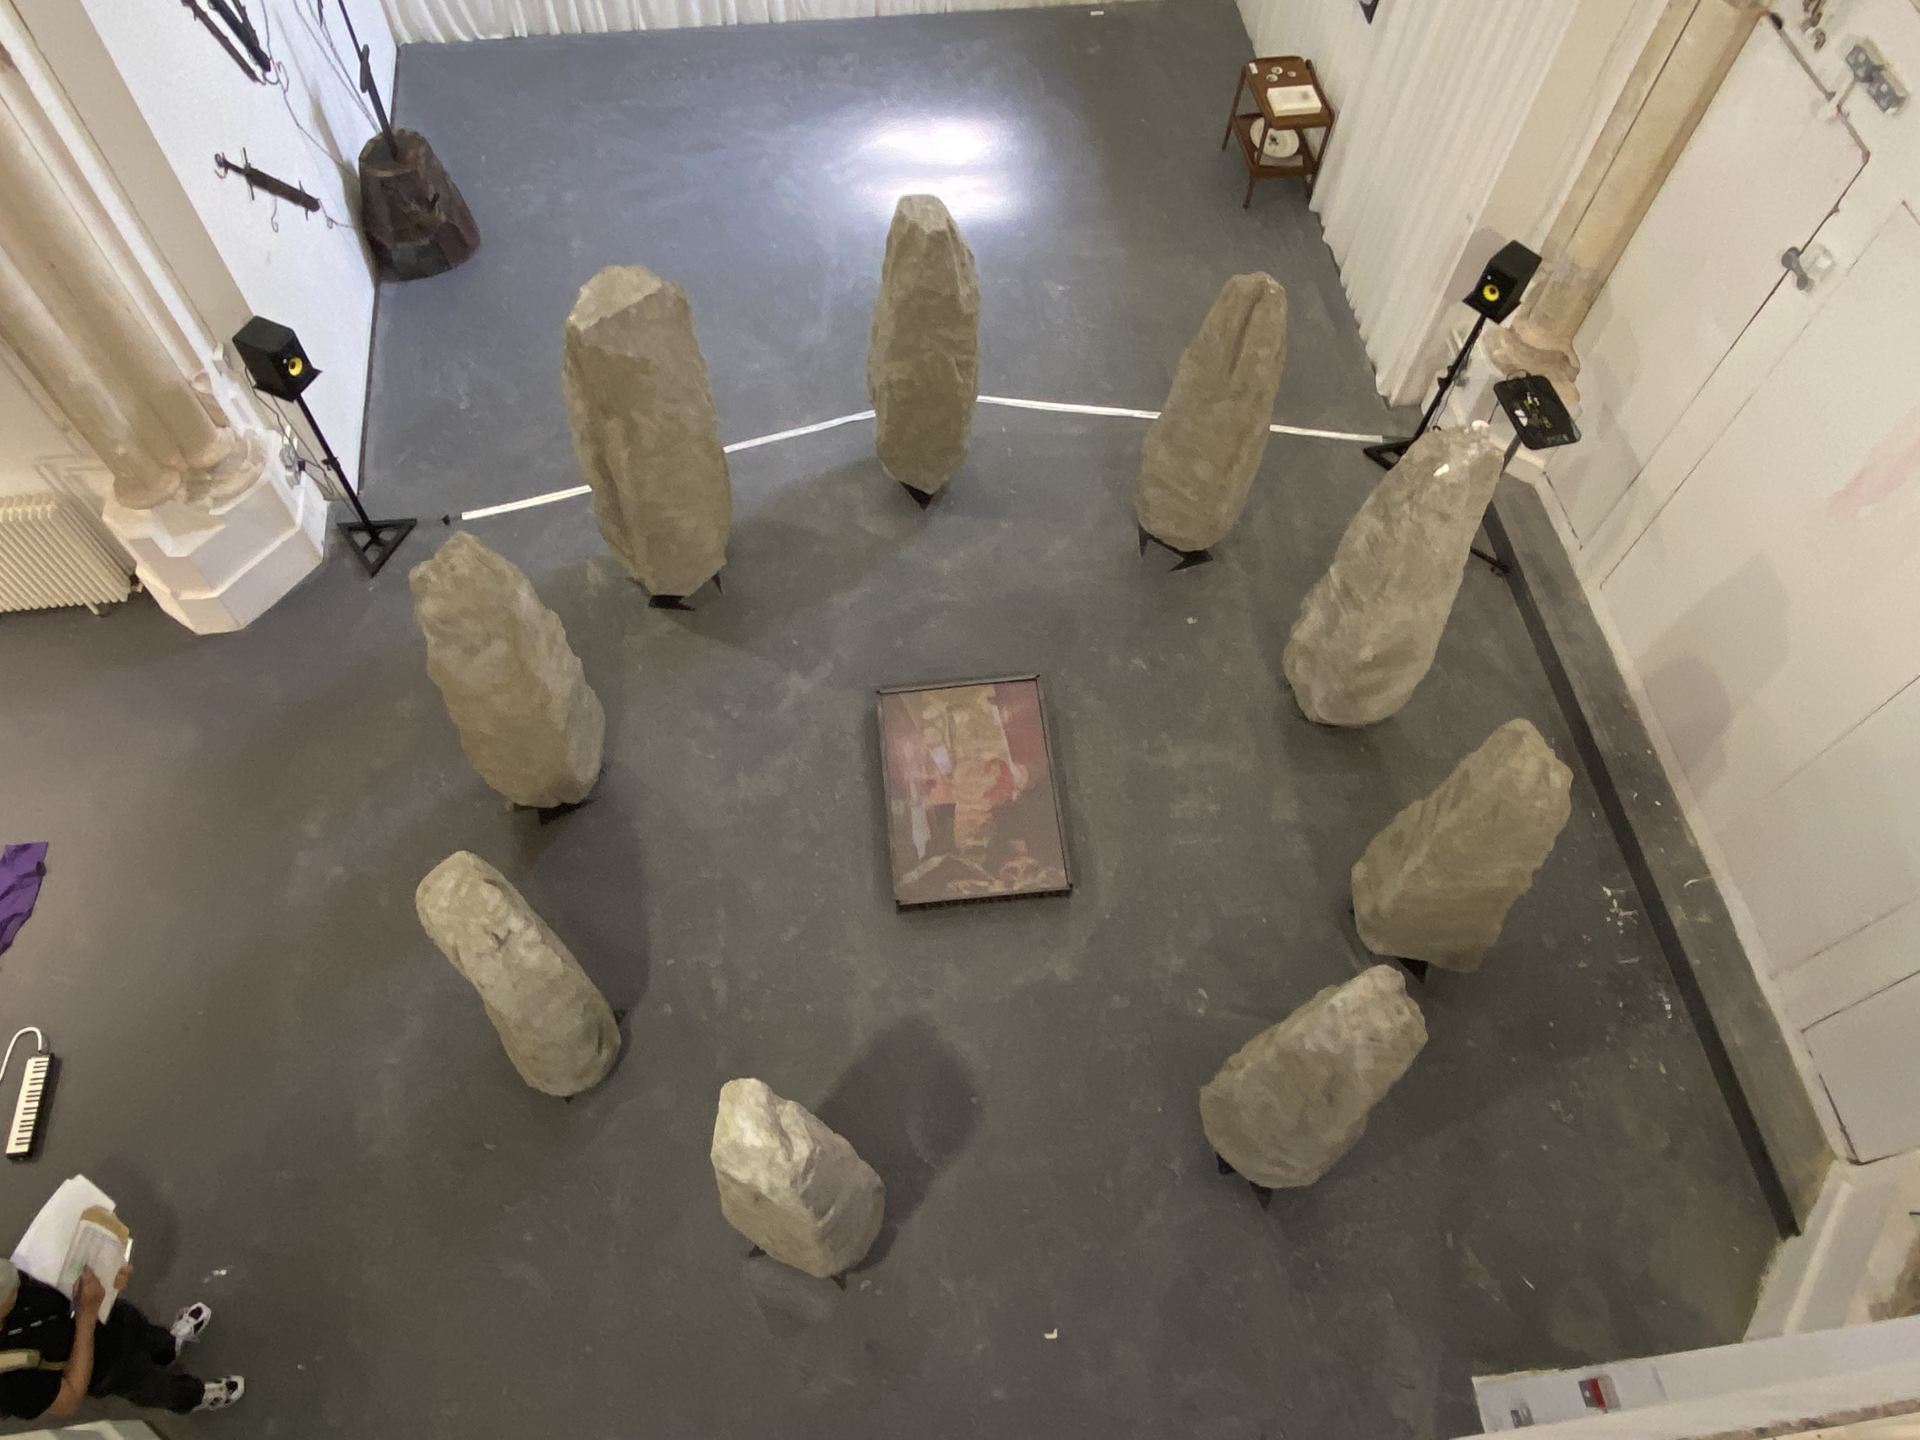 9 Standing stones surround a lightbox picturing an abstract image.